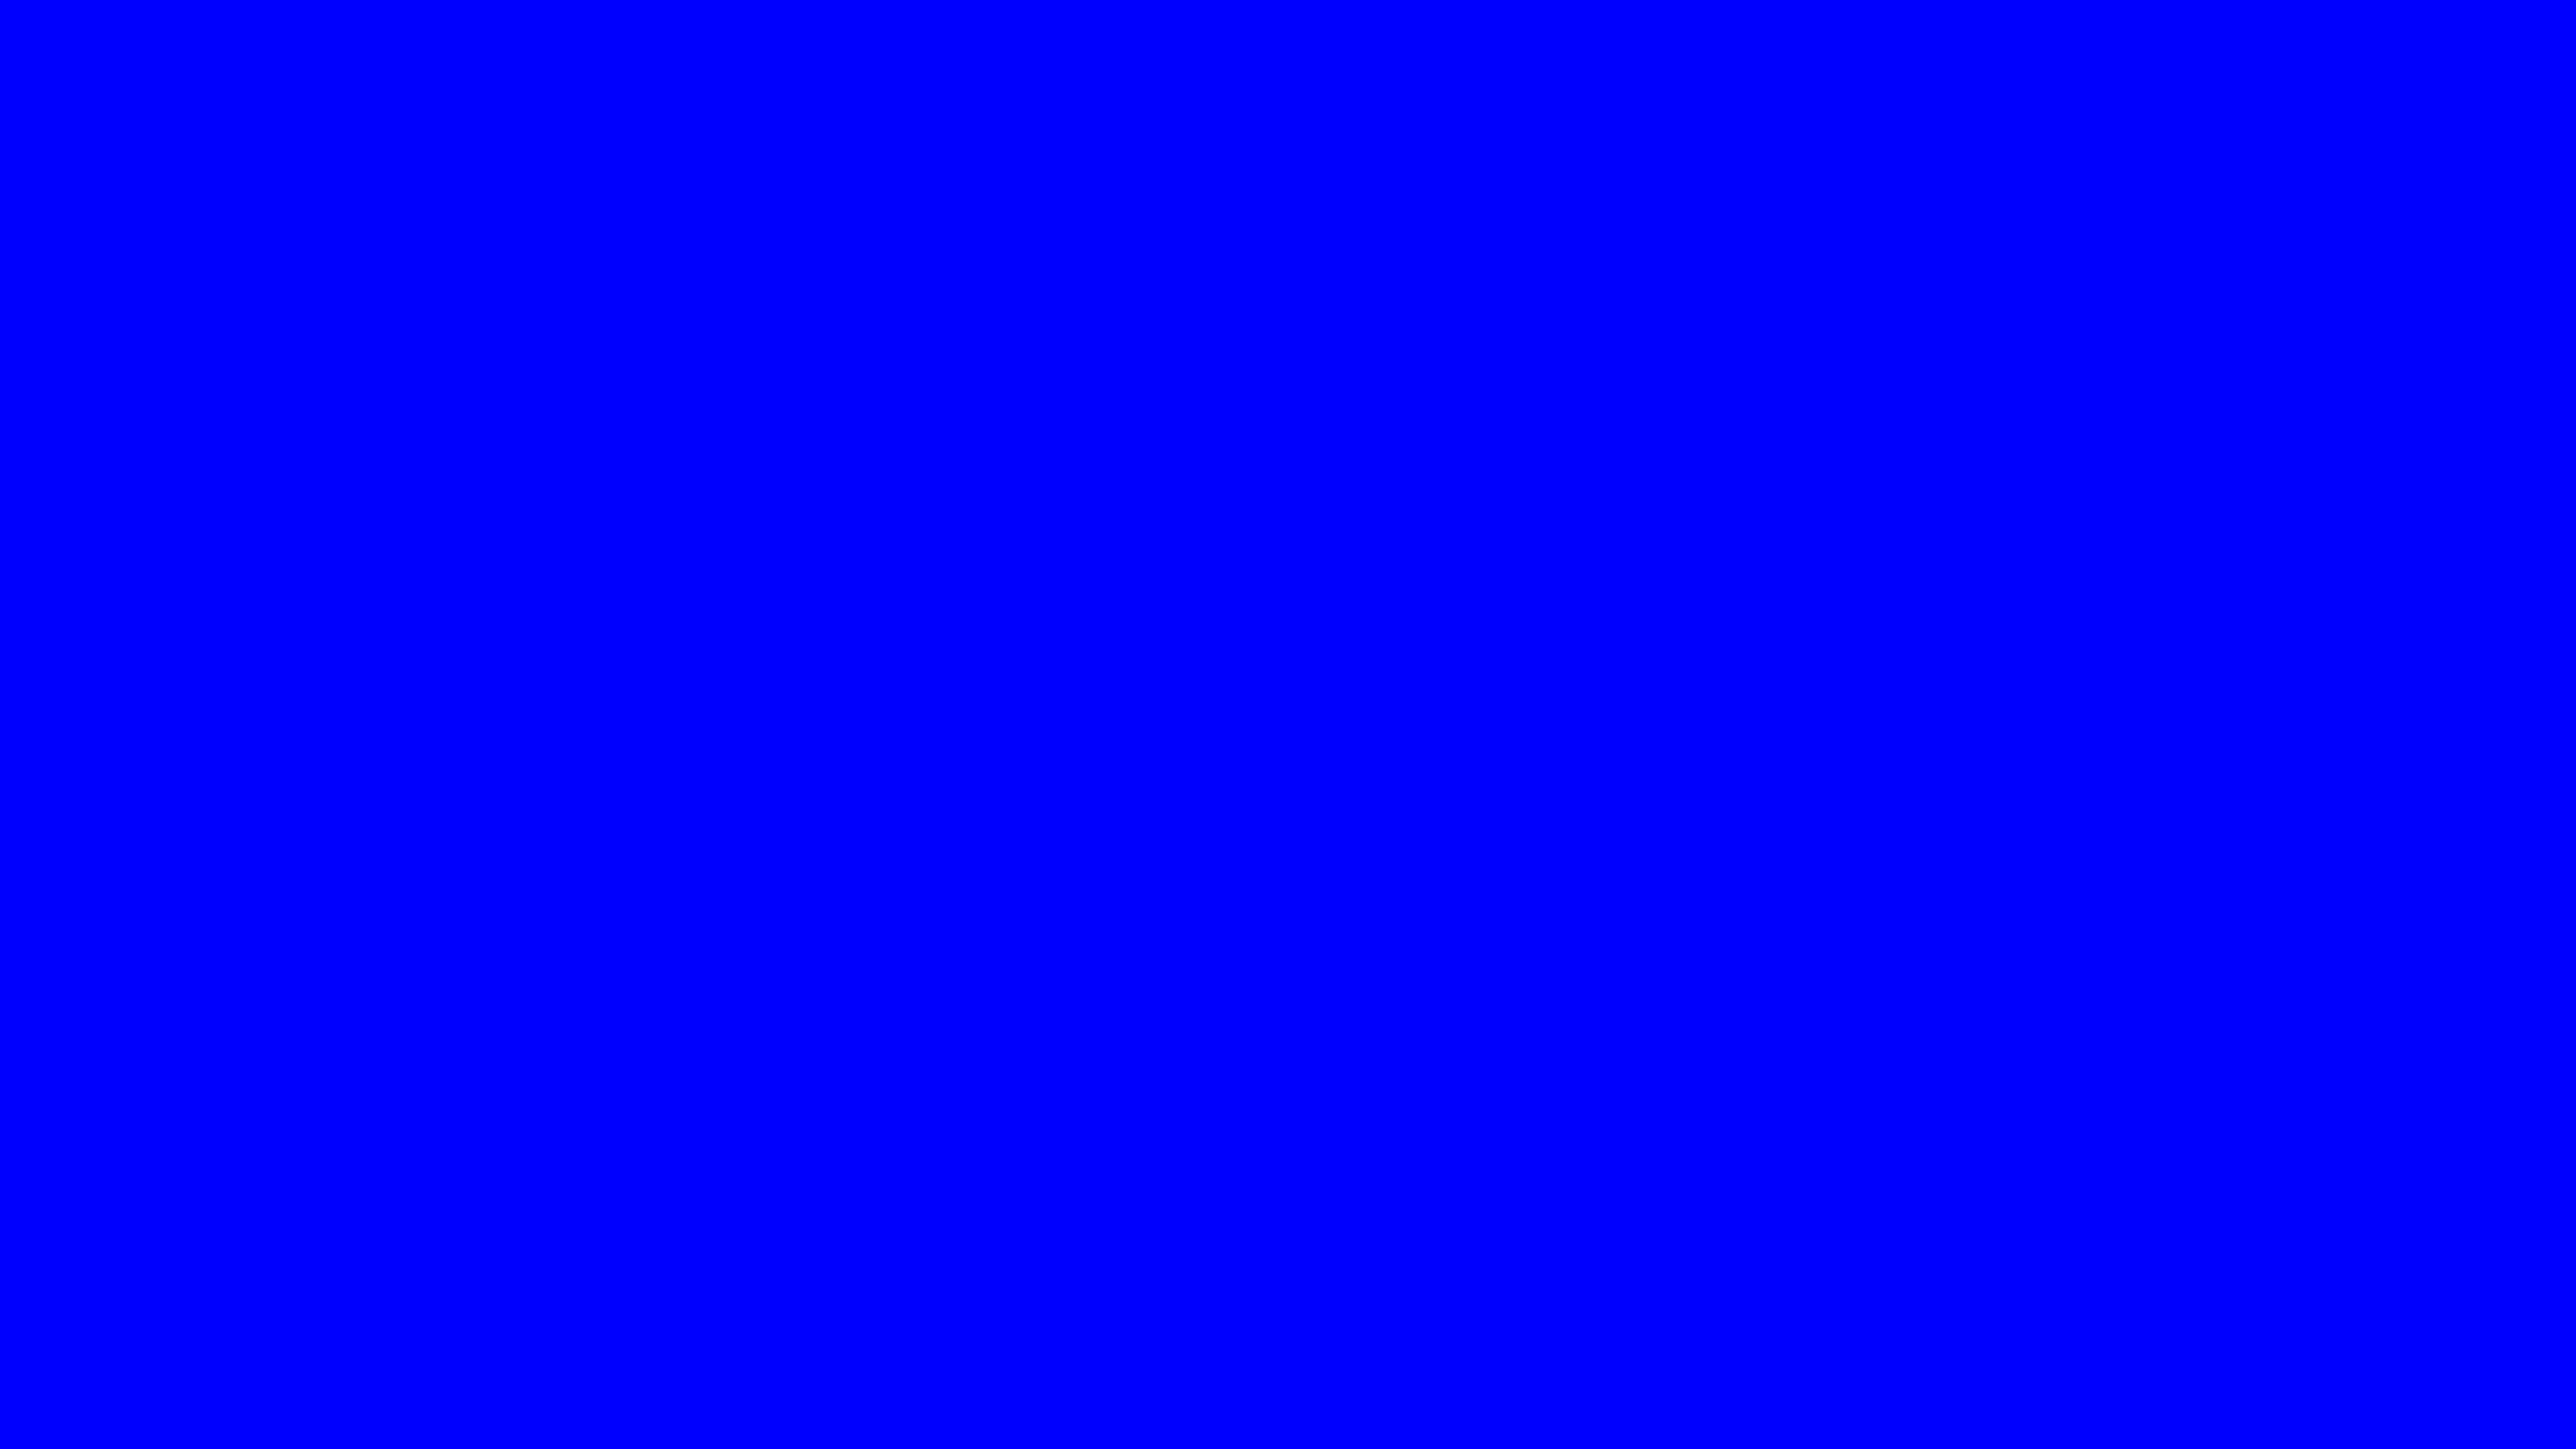 7680x4320 Blue Solid Color Background